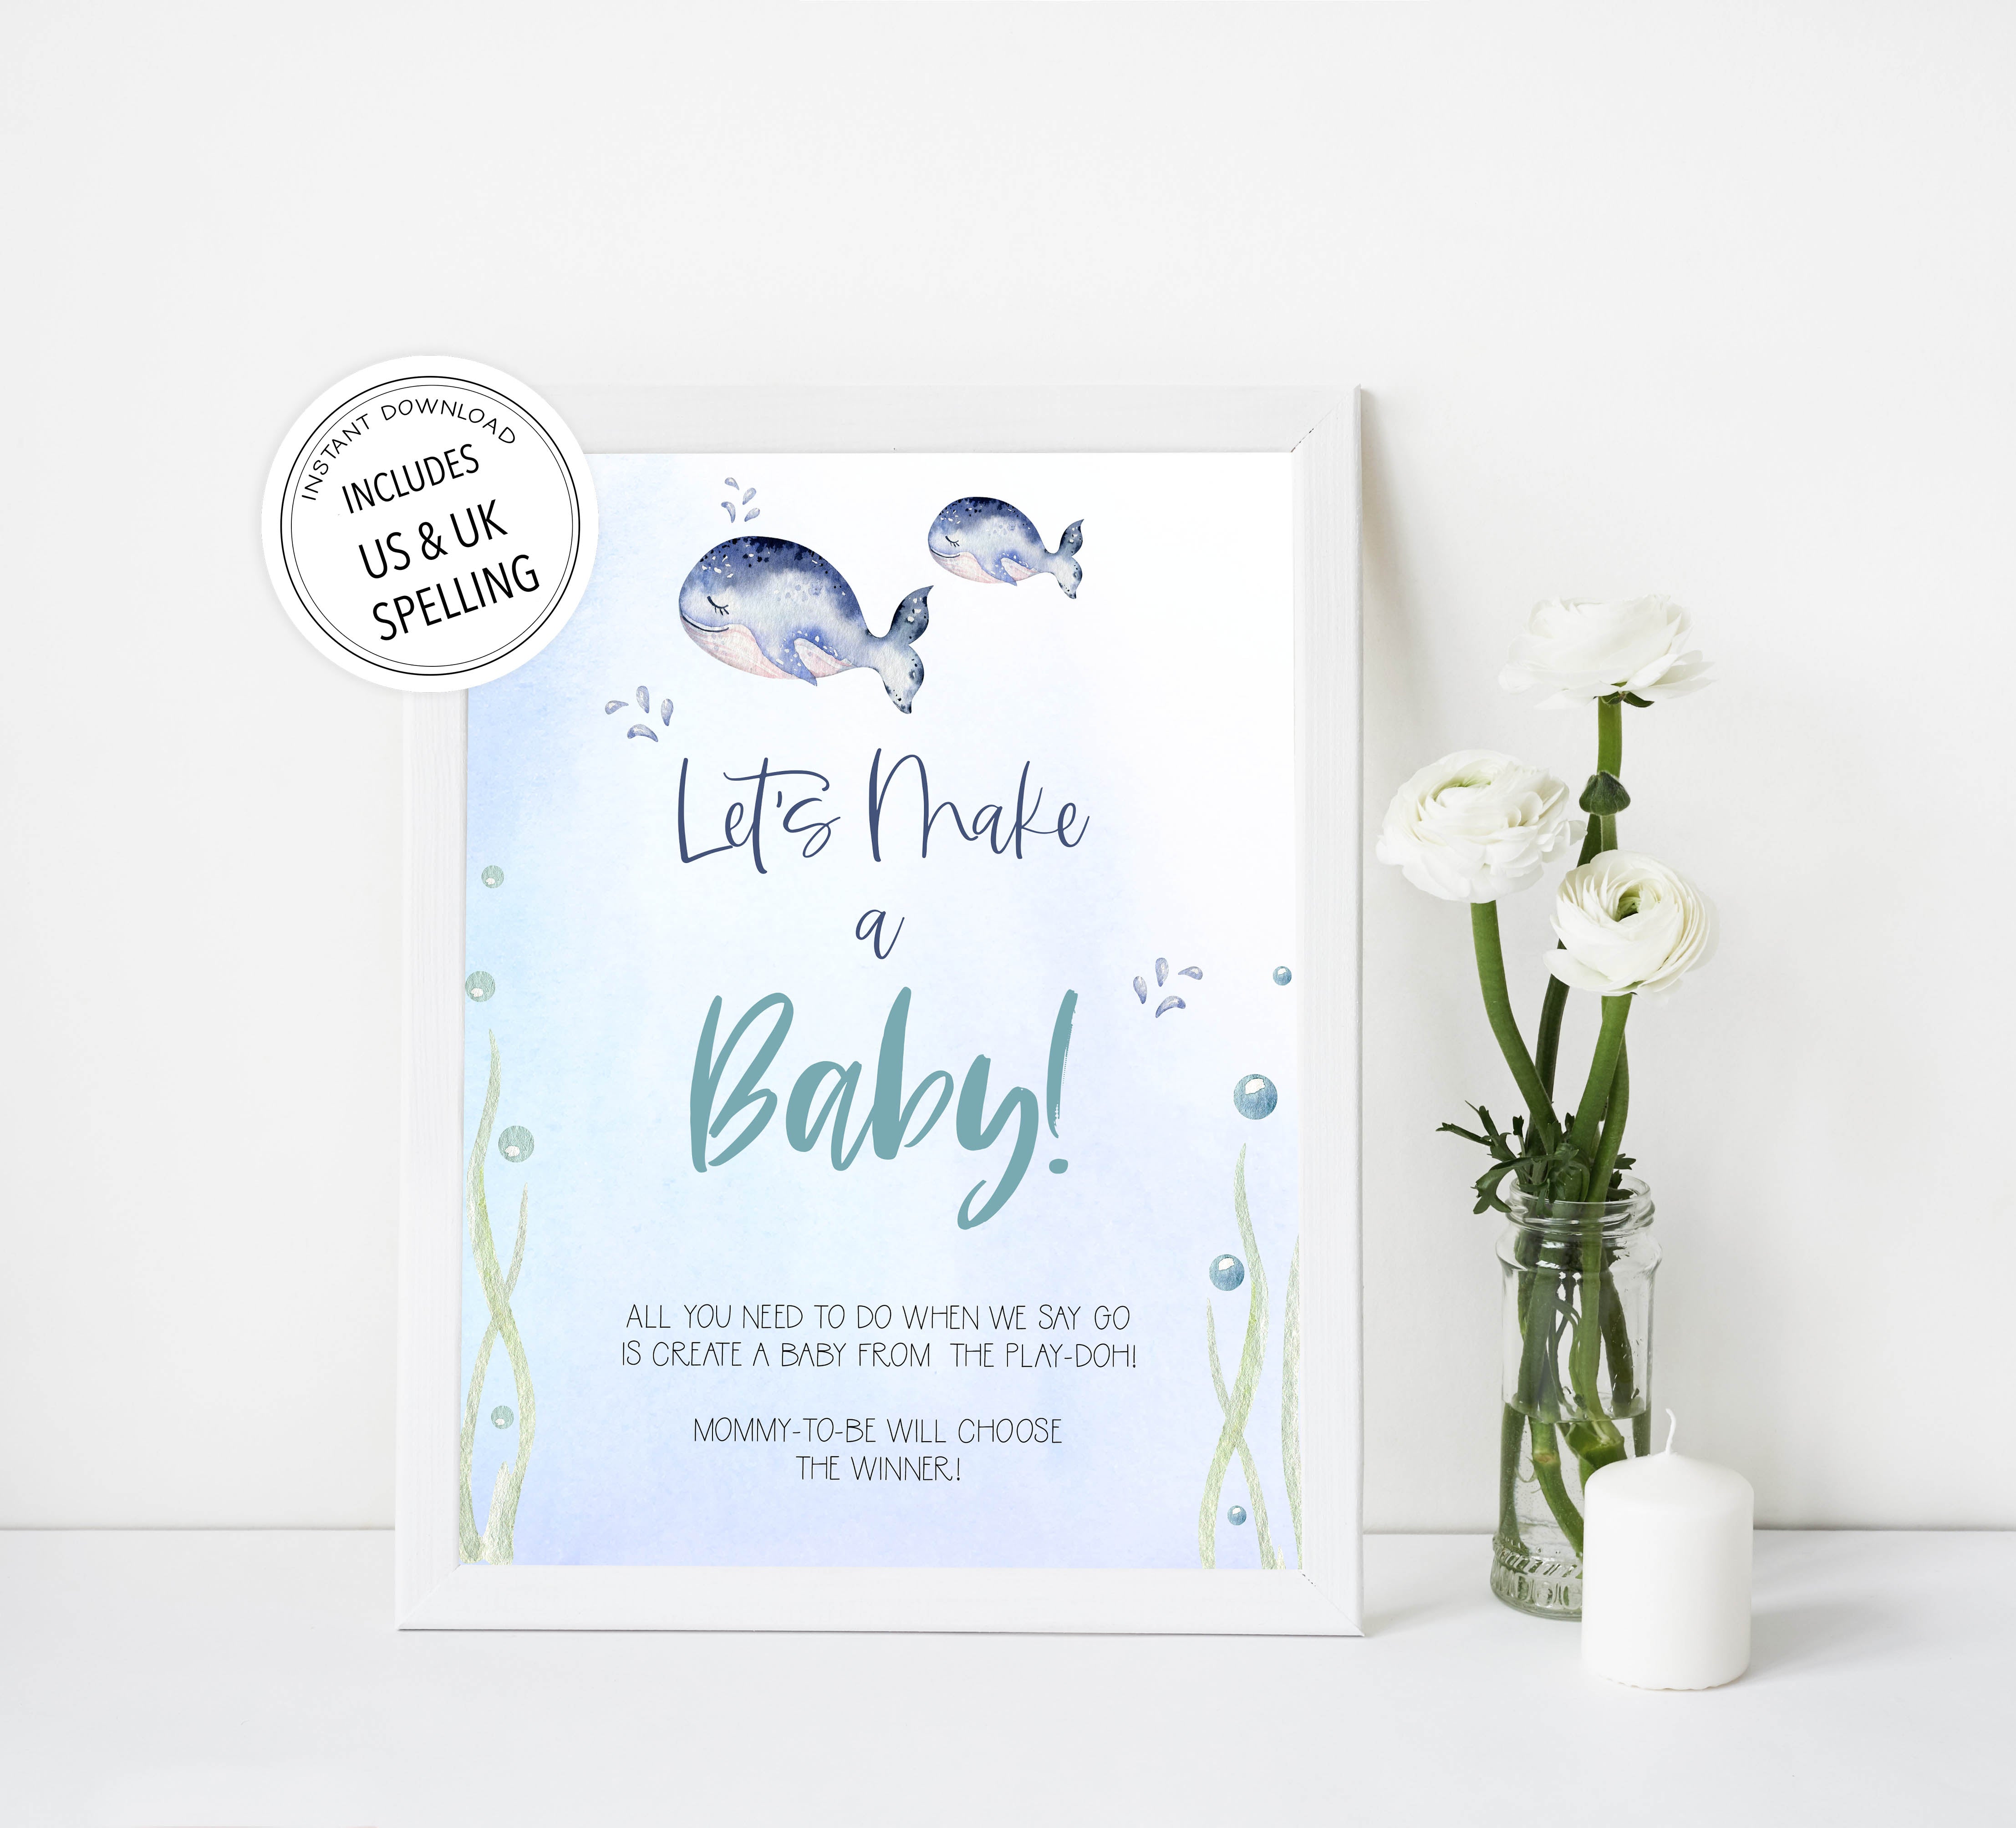 lets make a baby game, Printable baby shower games, whale baby games, baby shower games, fun baby shower ideas, top baby shower ideas, whale baby shower, baby shower games, fun whale baby shower ideas